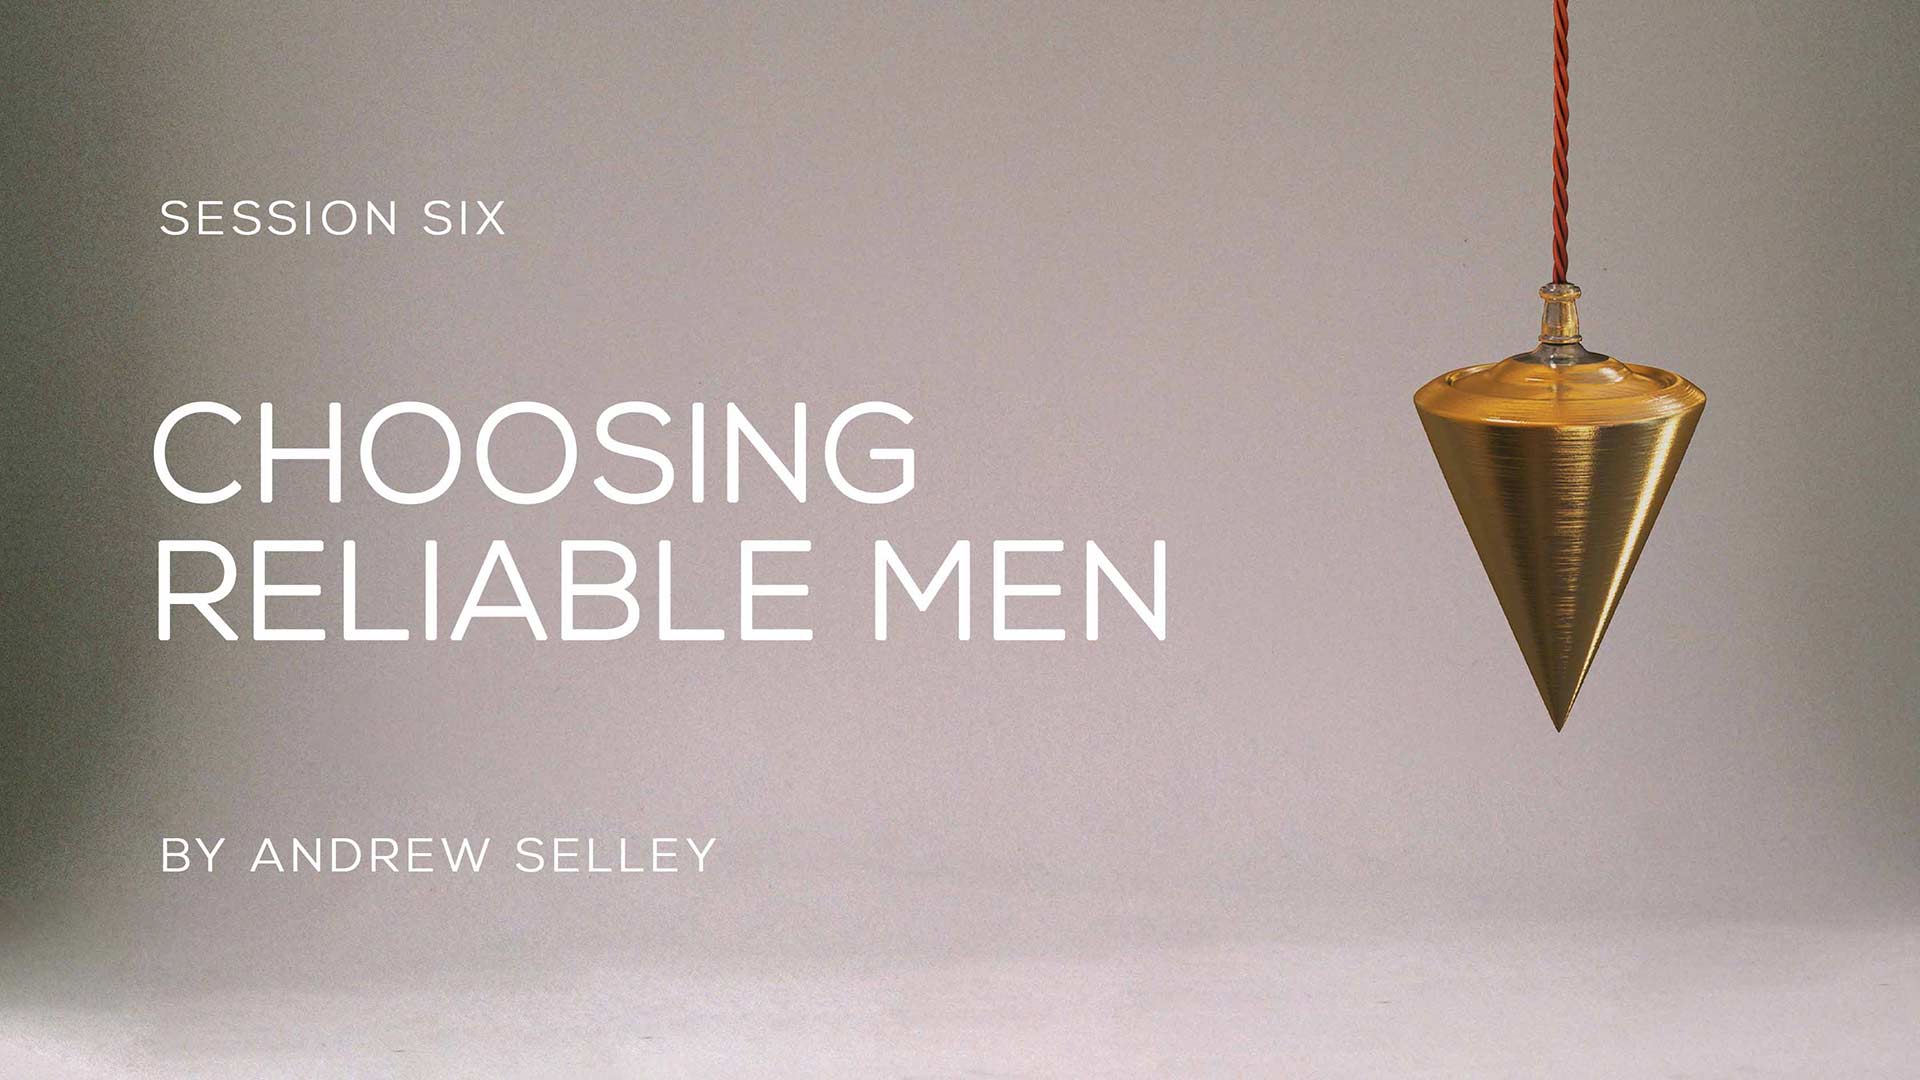 Video image for 'Choosing Reliable Men’ about dealing with immaturity